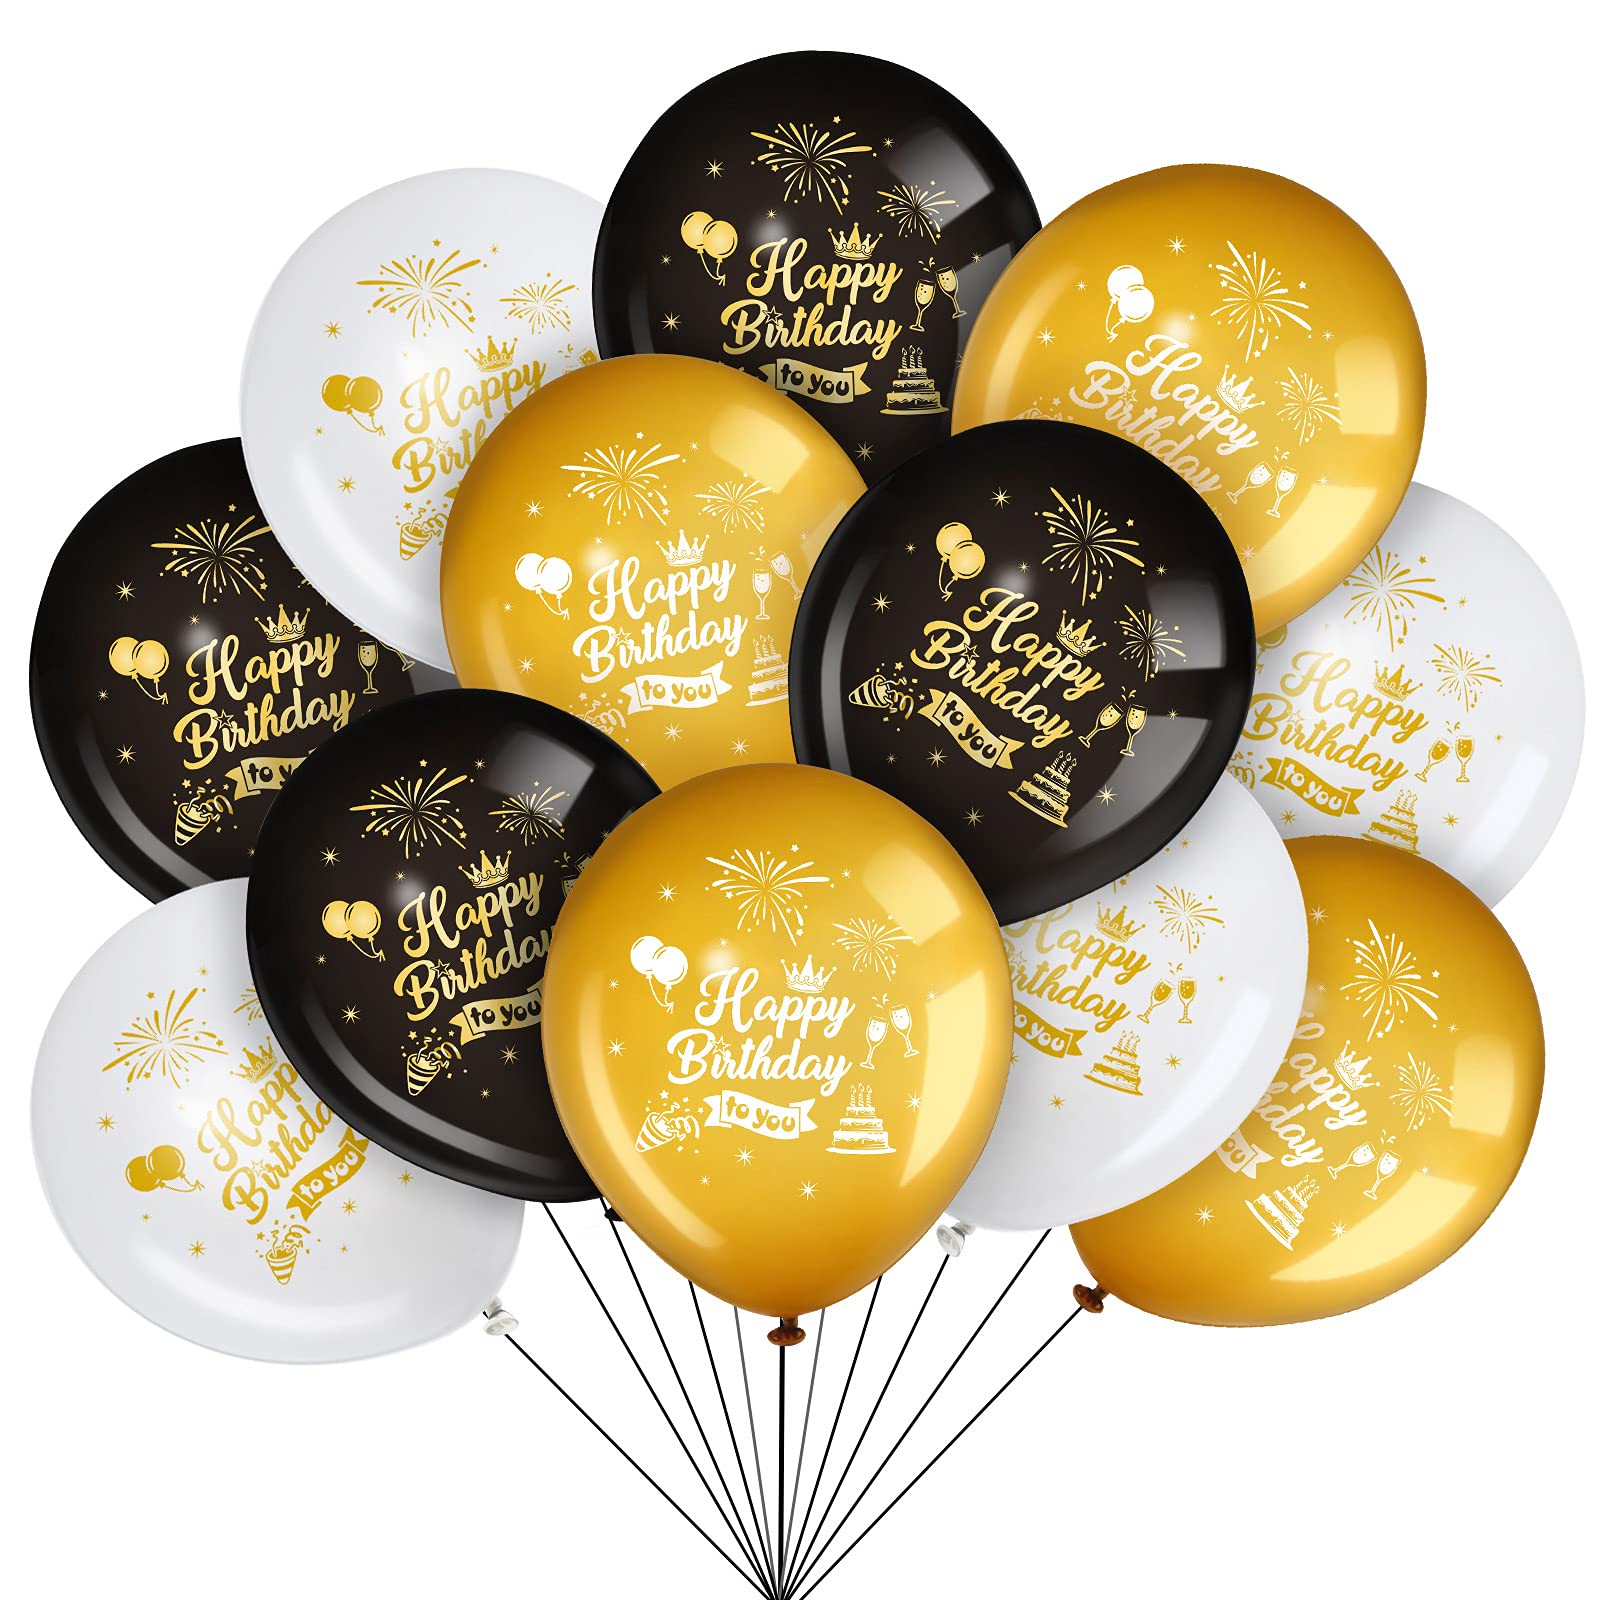 45 Piece 12 Inch Birthday Party Latex Balloons, Black Gold White Theme Party Balloon Birthday Anniversary Party Decoration for Girl Boy Women Men Birthday Party Supplies Indoor Outdoor Decoration